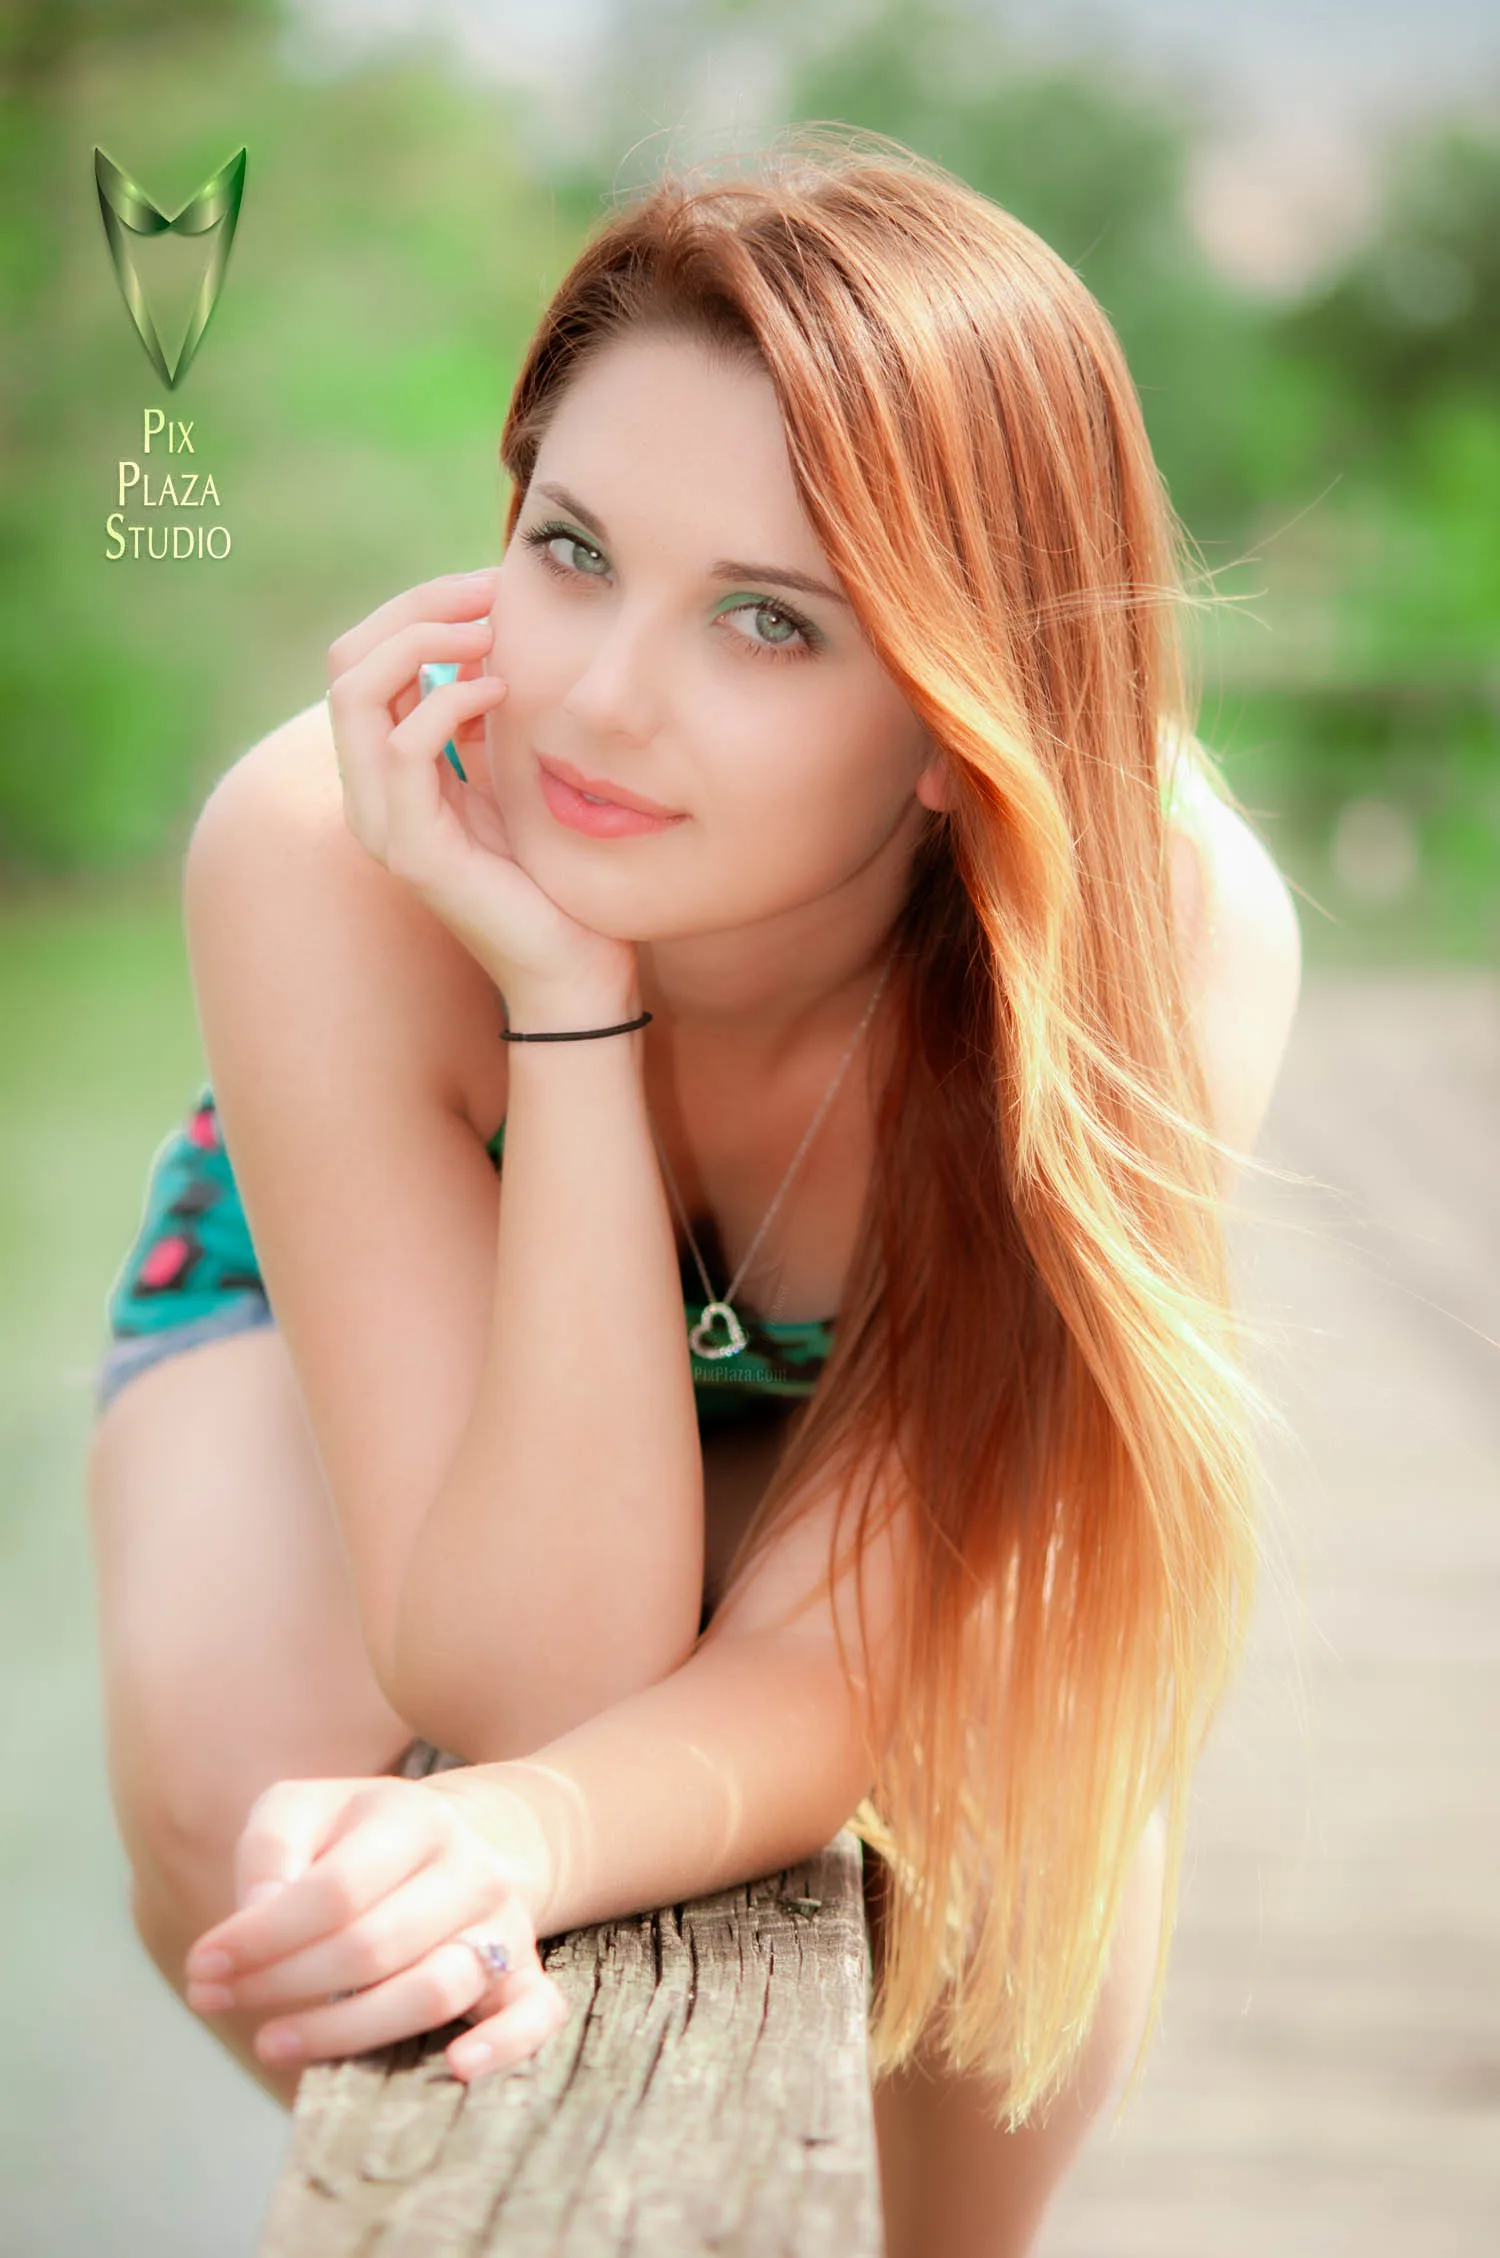 Ginger hair girl outdoors sitting on fence and leaning forward